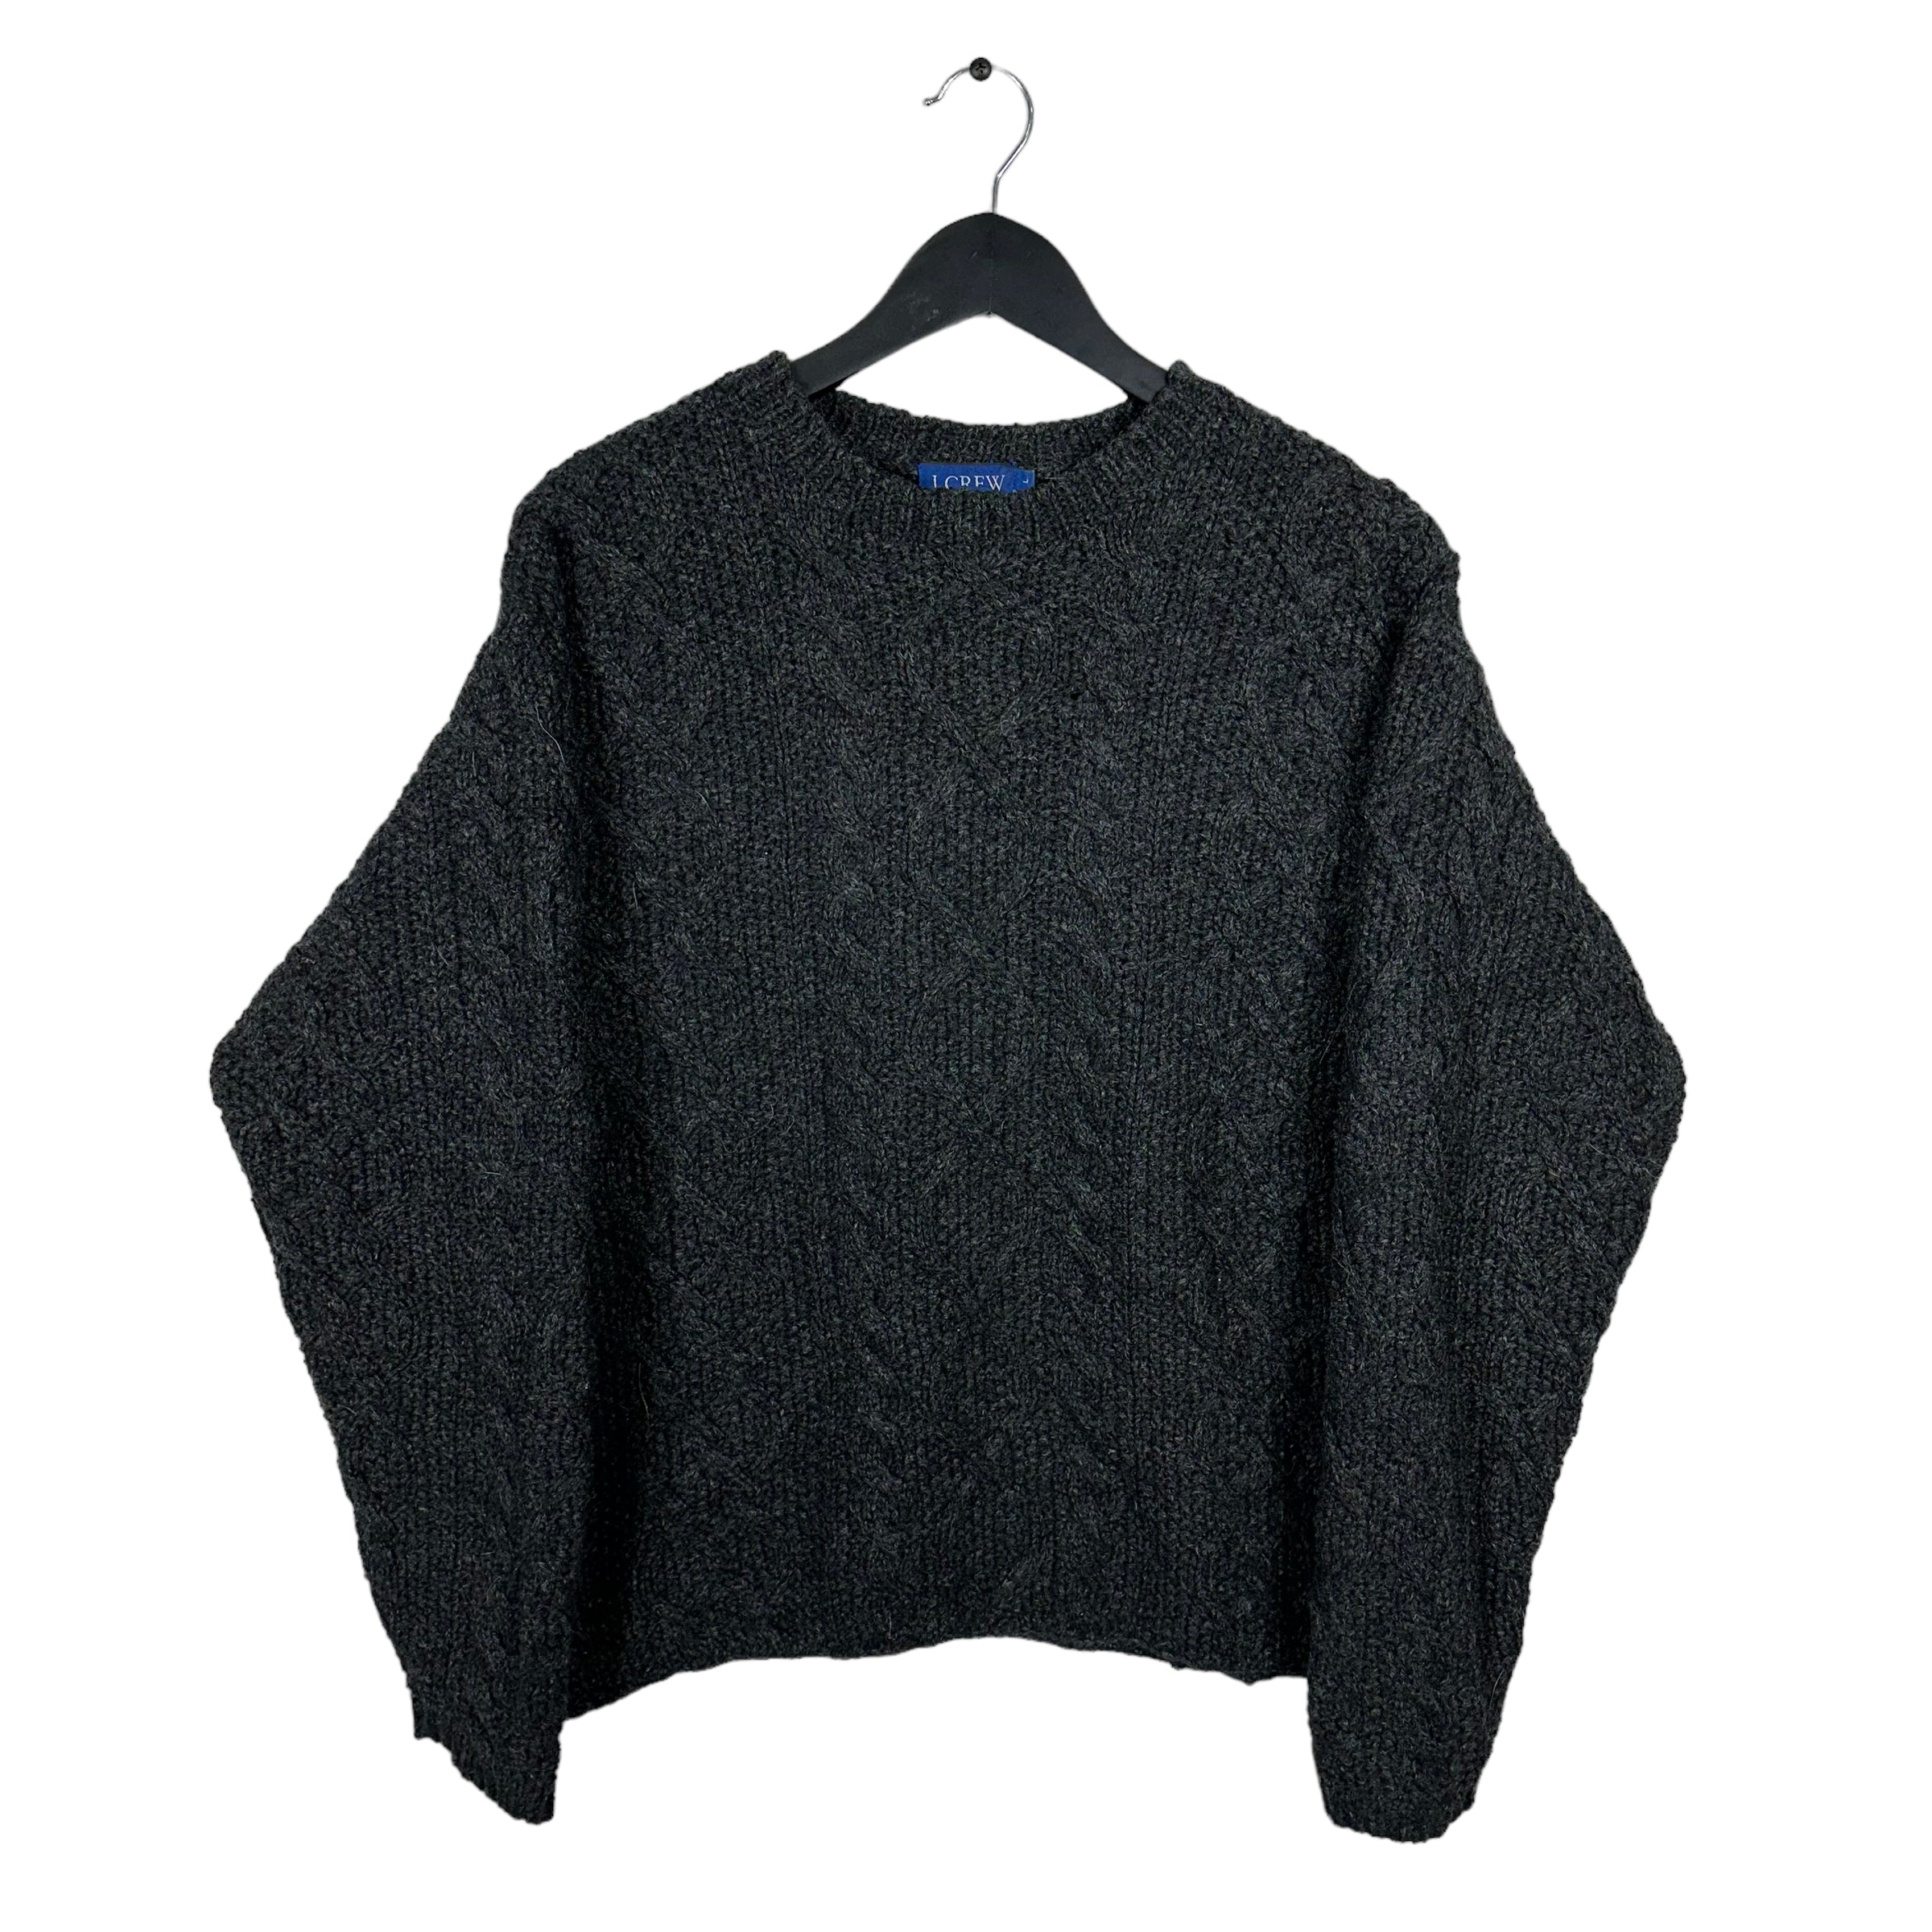 Vintage J. Crew Cable Knit Sweater